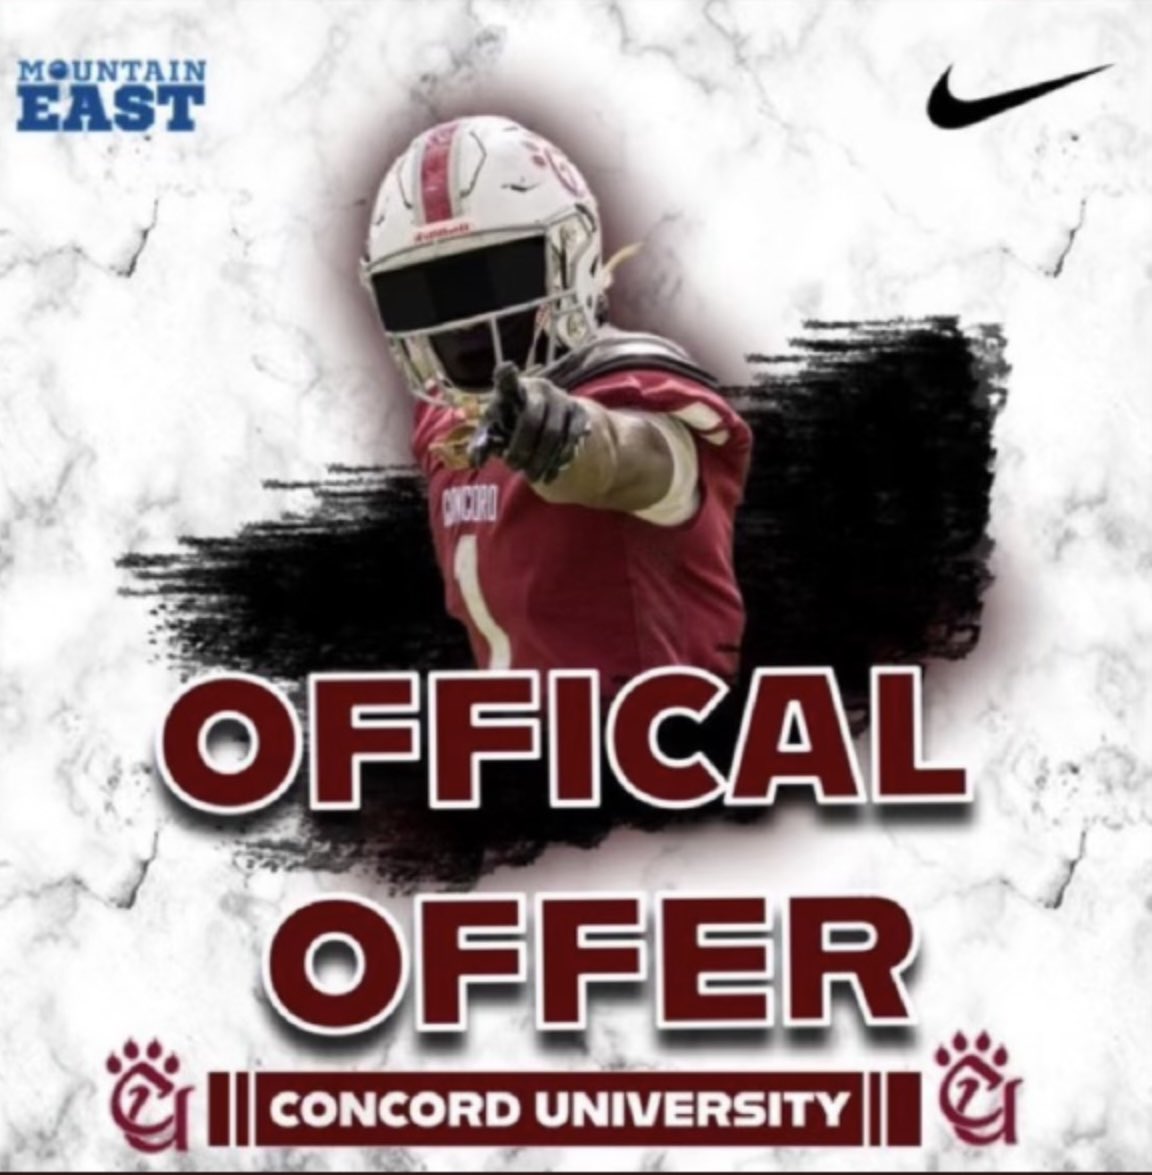 Blessed to receive an offer from Concord University @Coach_CA912